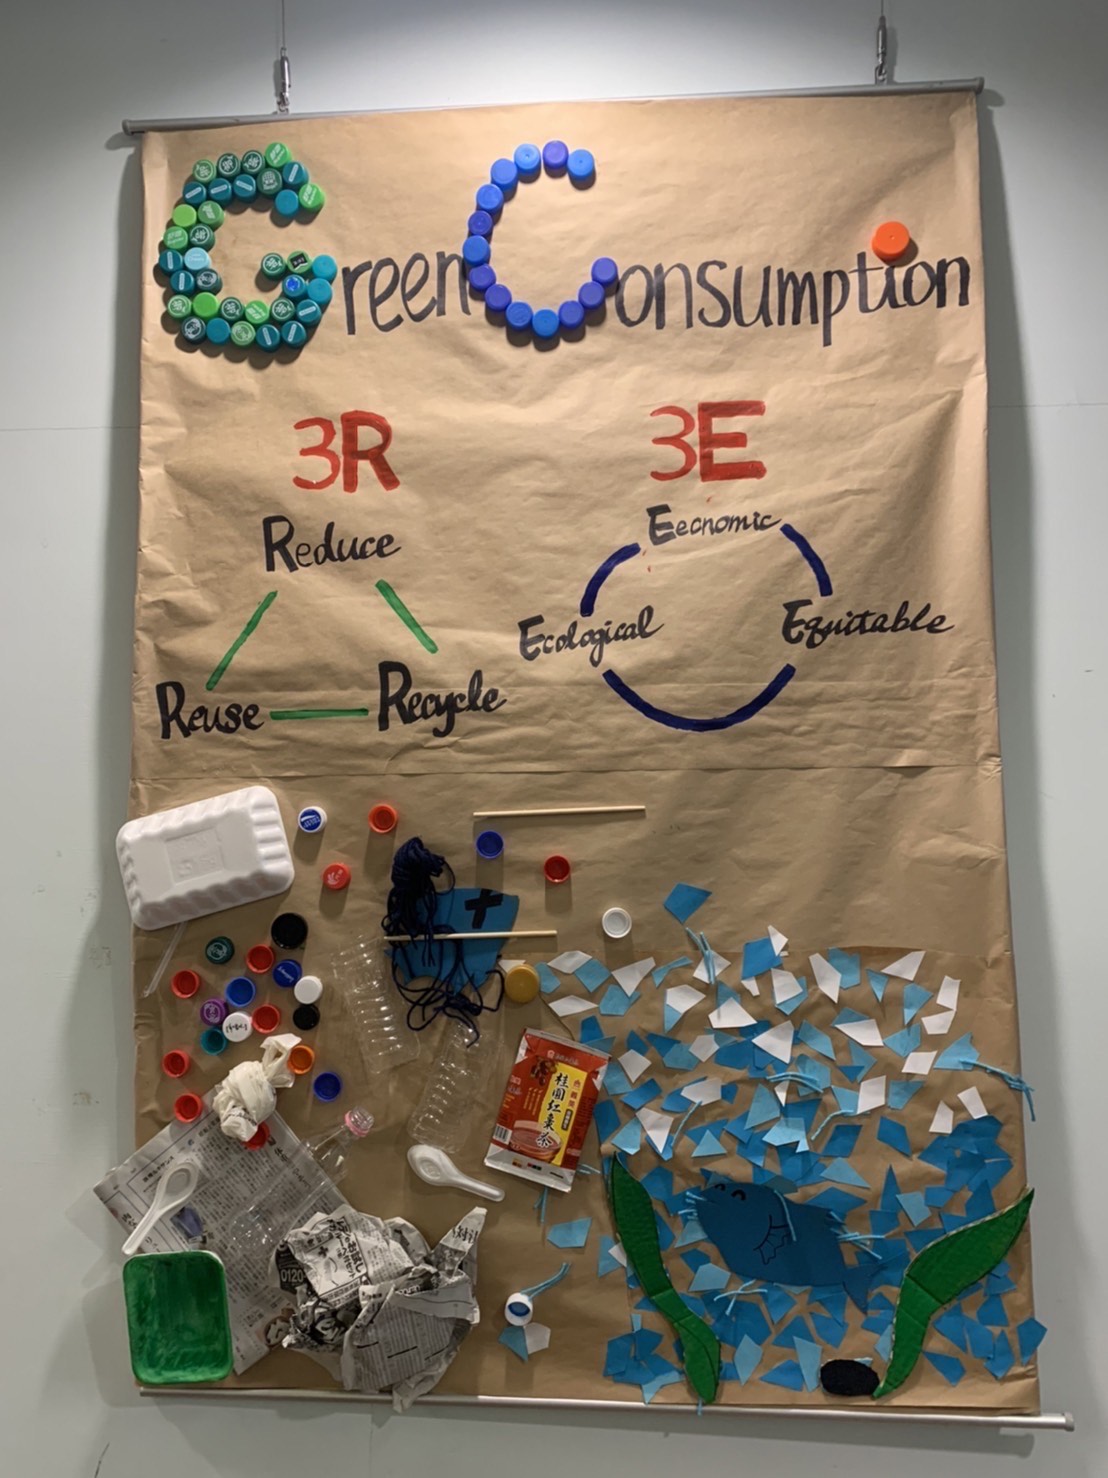 （Group 7）: SDG 12 Responsible Consumption and Production